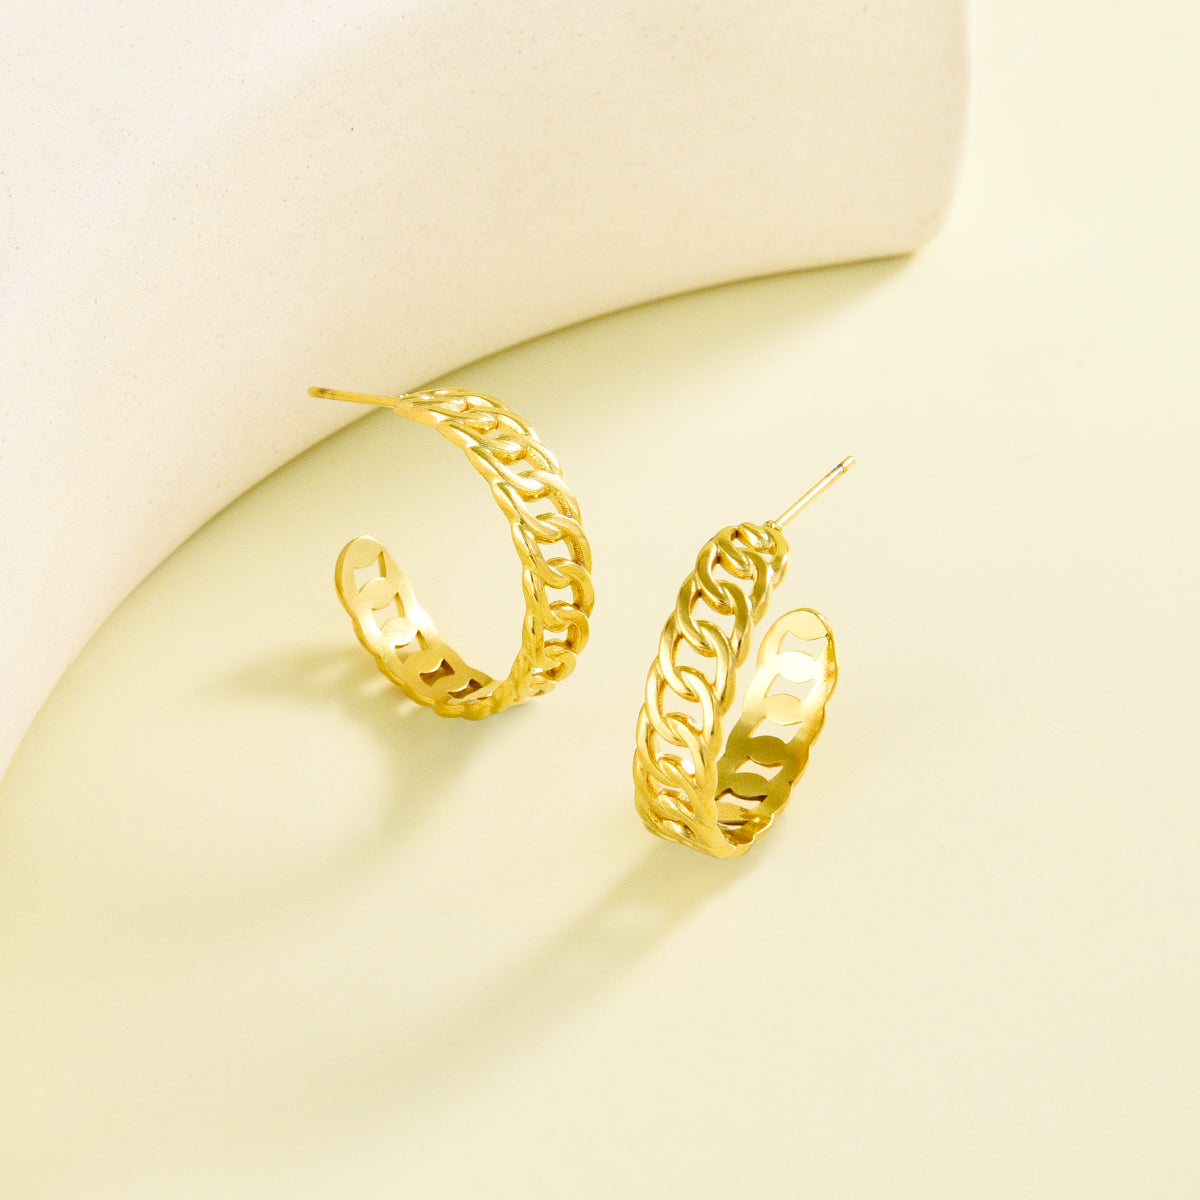 Small sized golden earrings with chain design